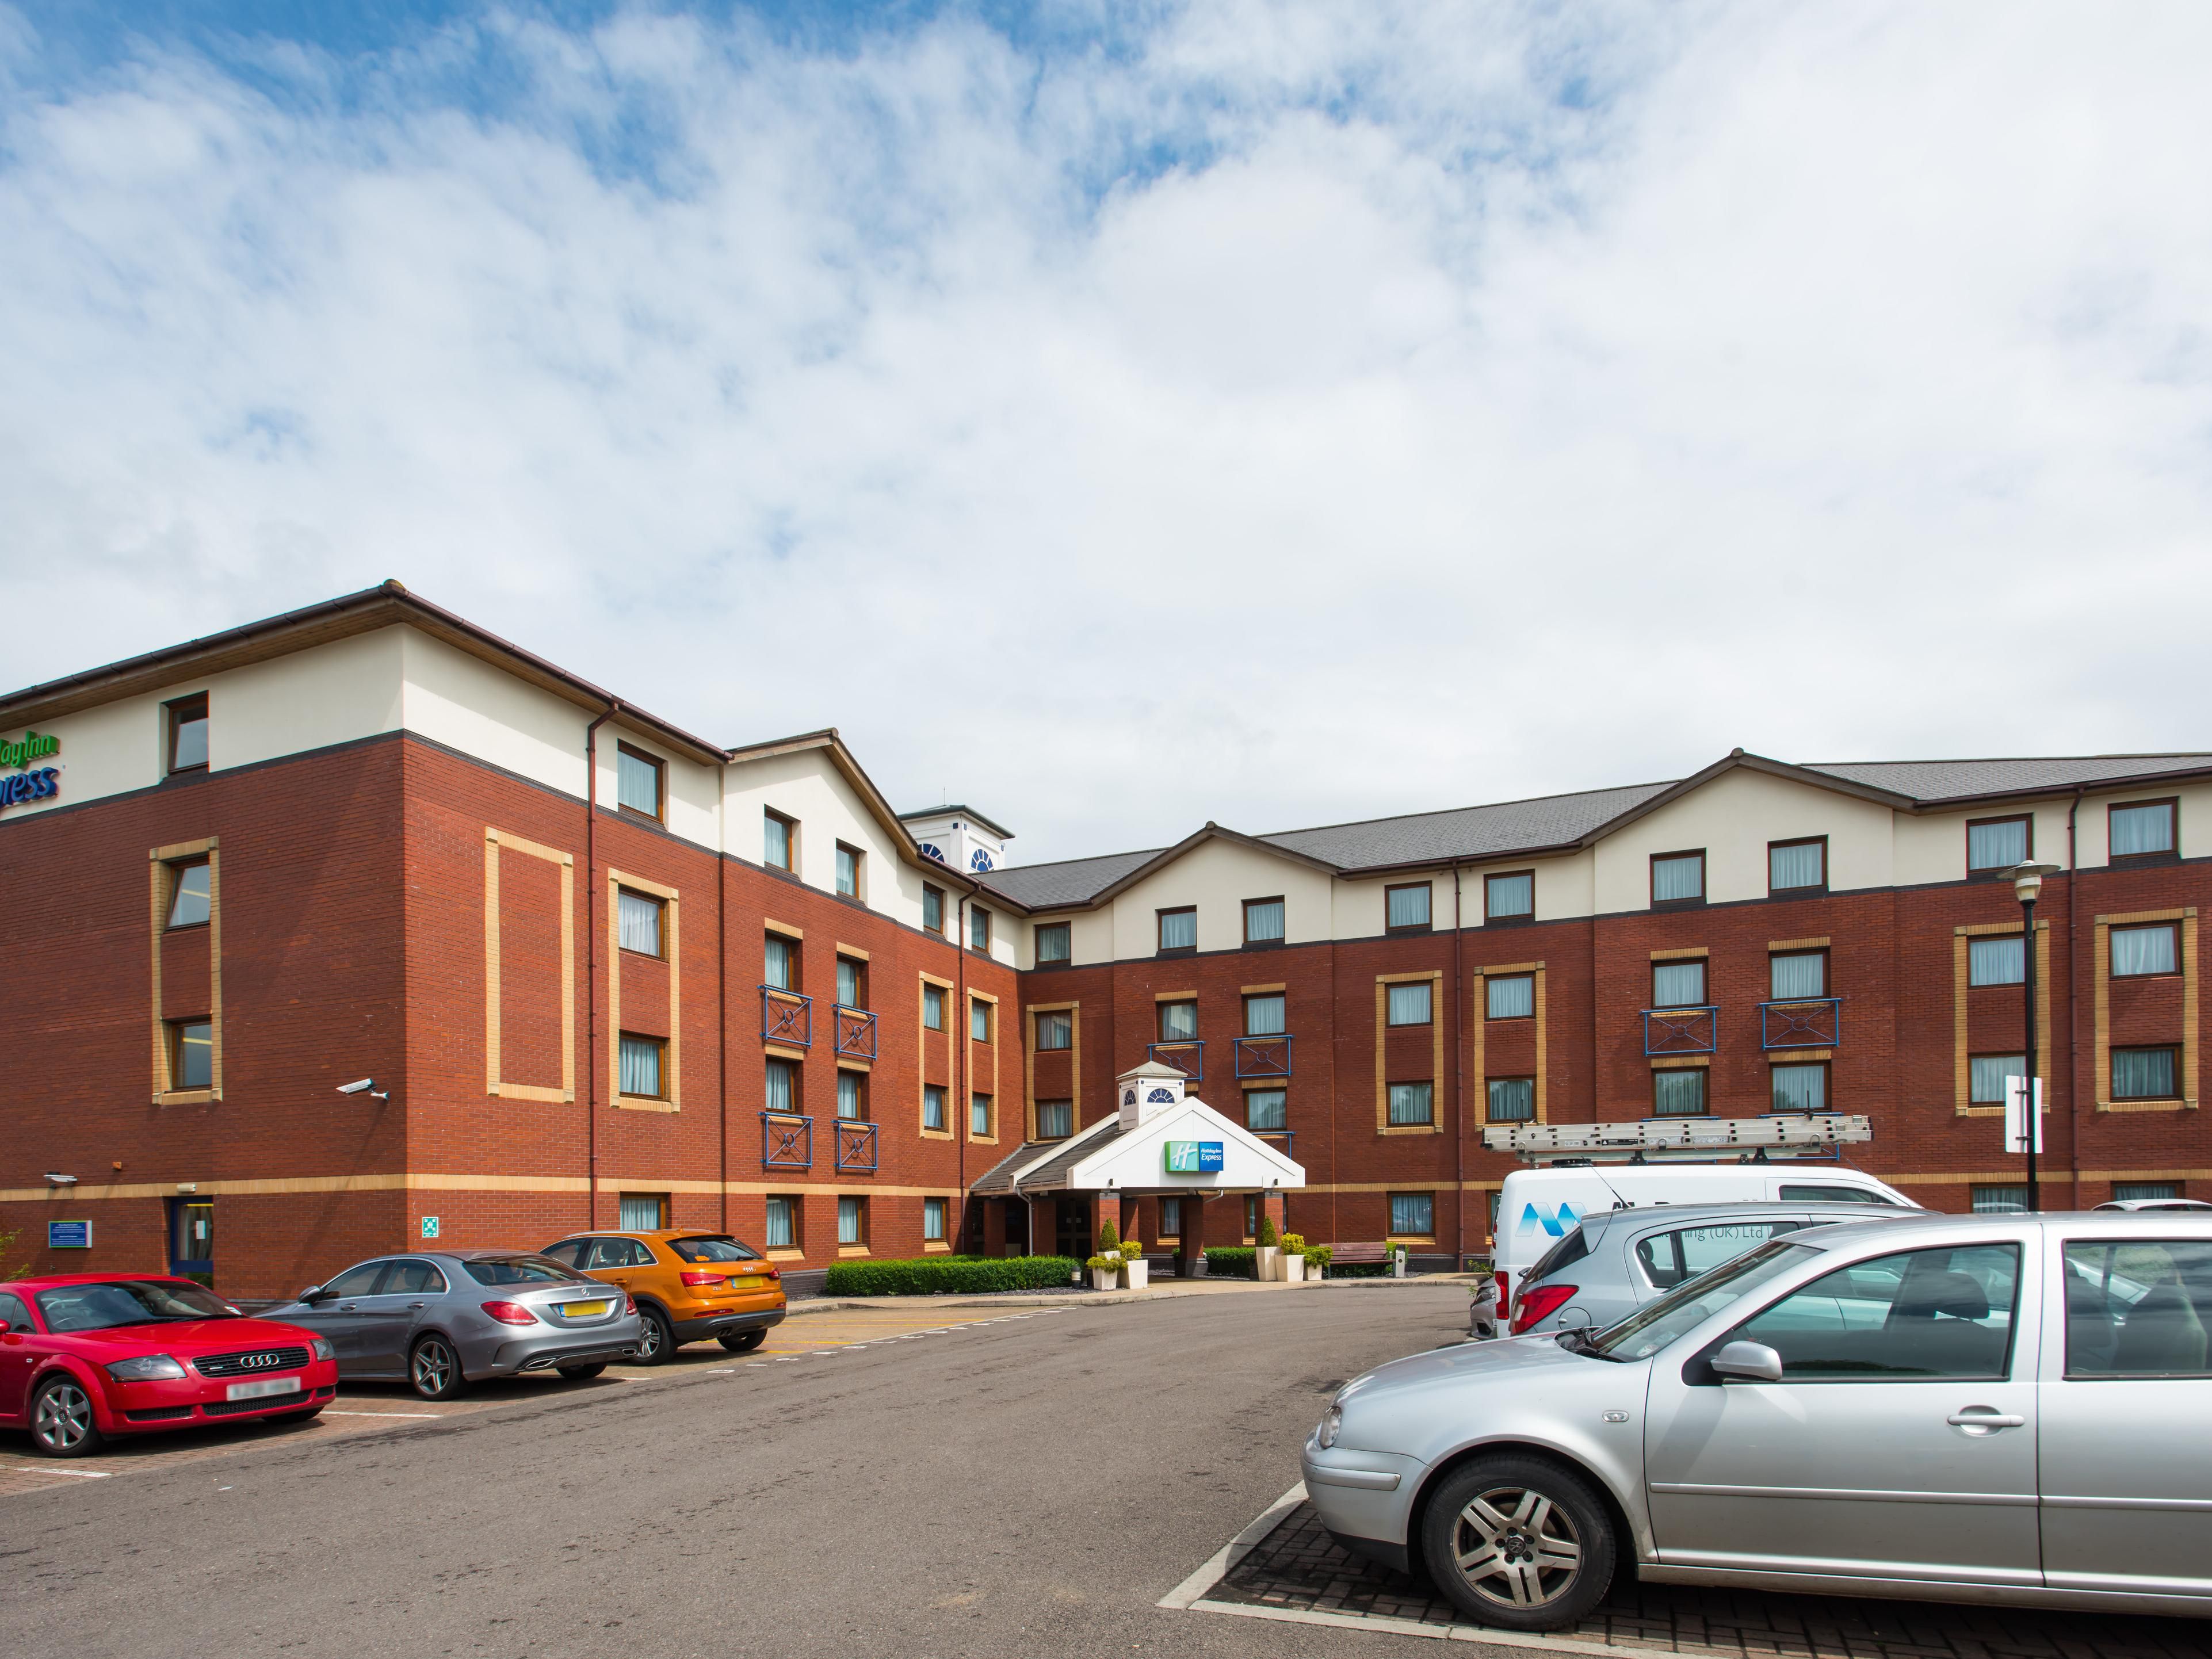 Discount [50% Off] Holiday Inn Express Gloucester United Kingdom - Hotel Near Me | Reef View ...